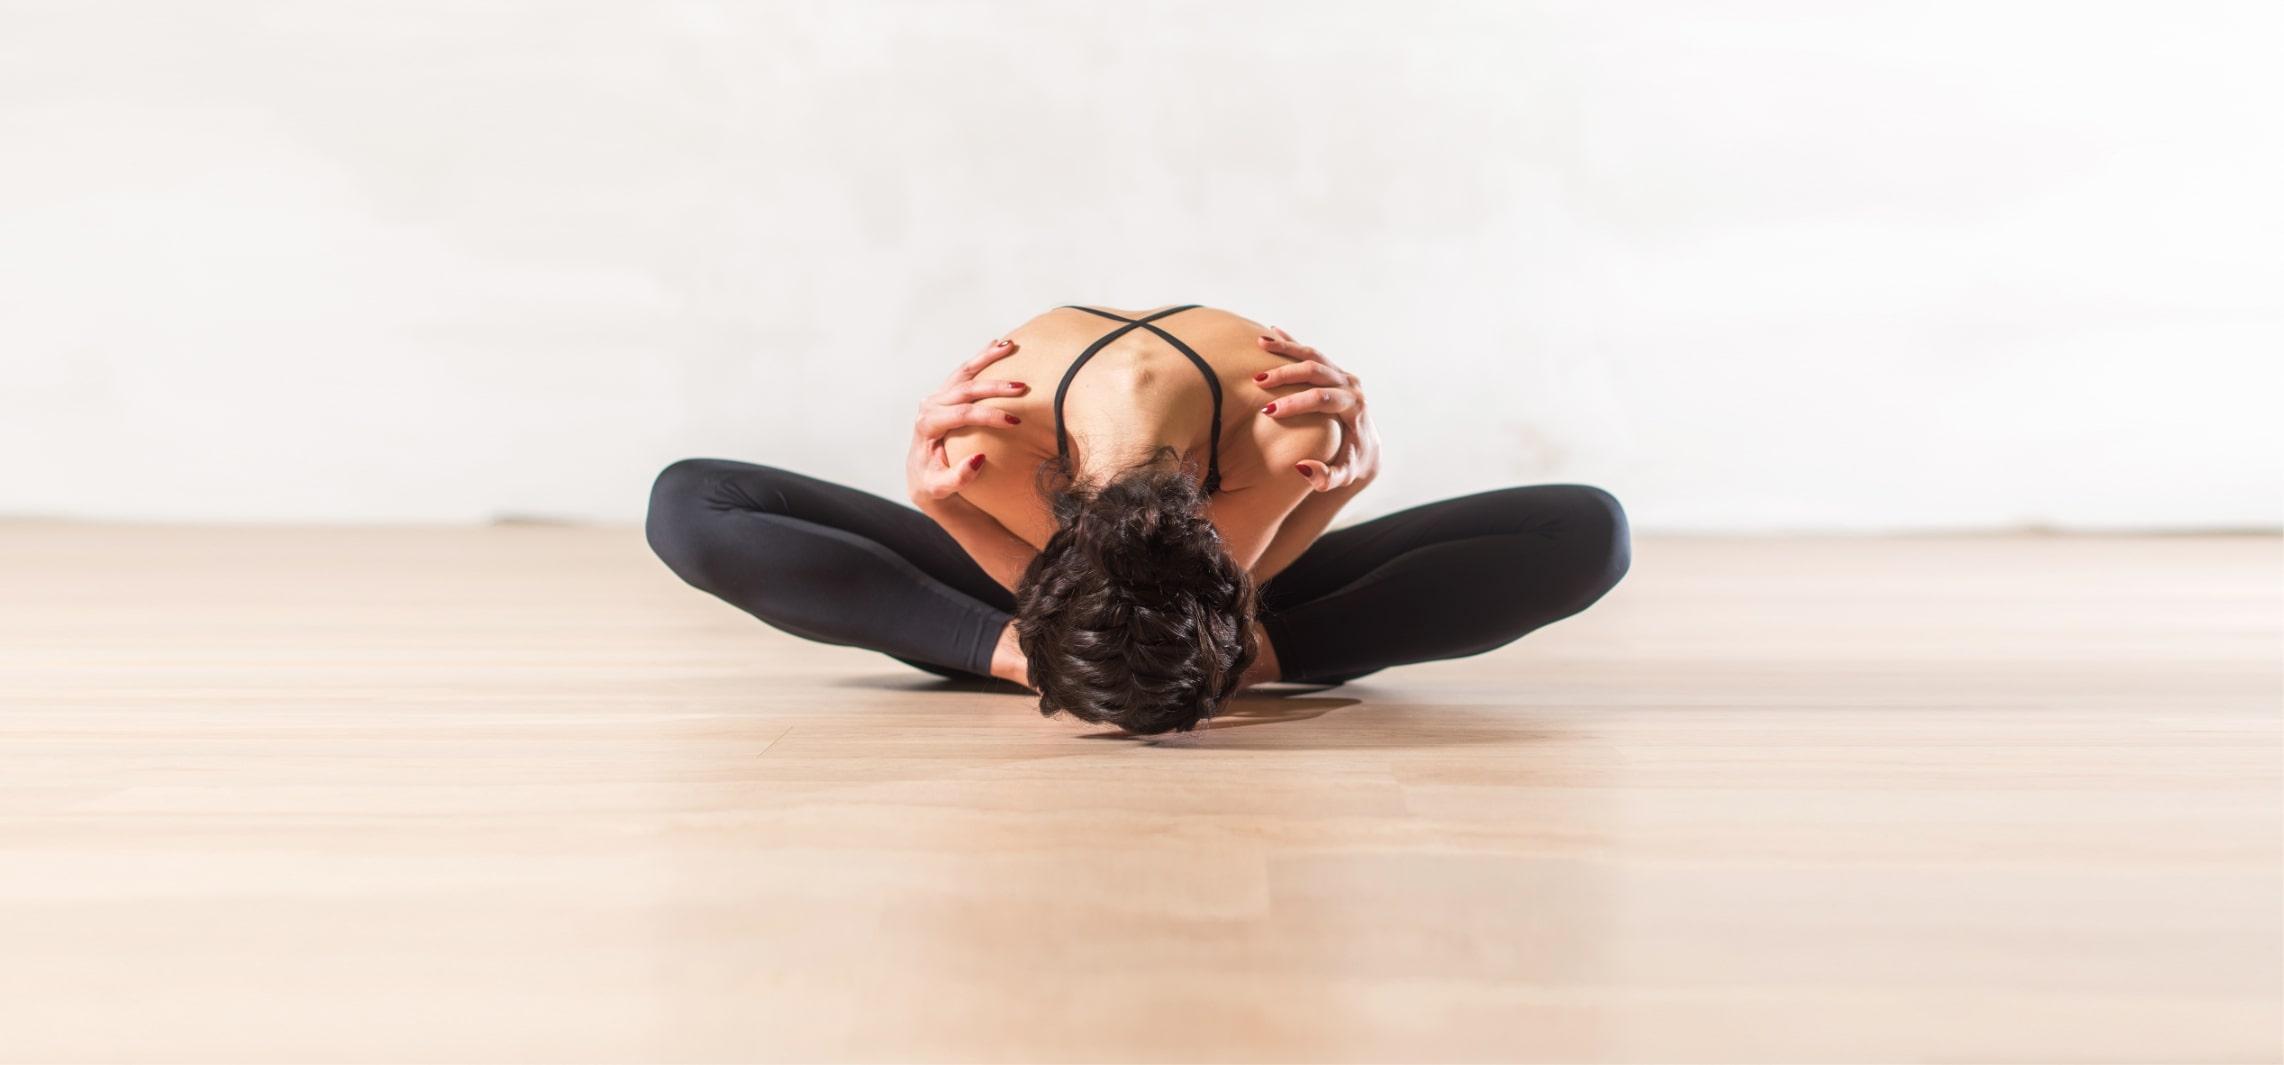 17 Yoga Poses for Intermediate and Advanced Practitioners